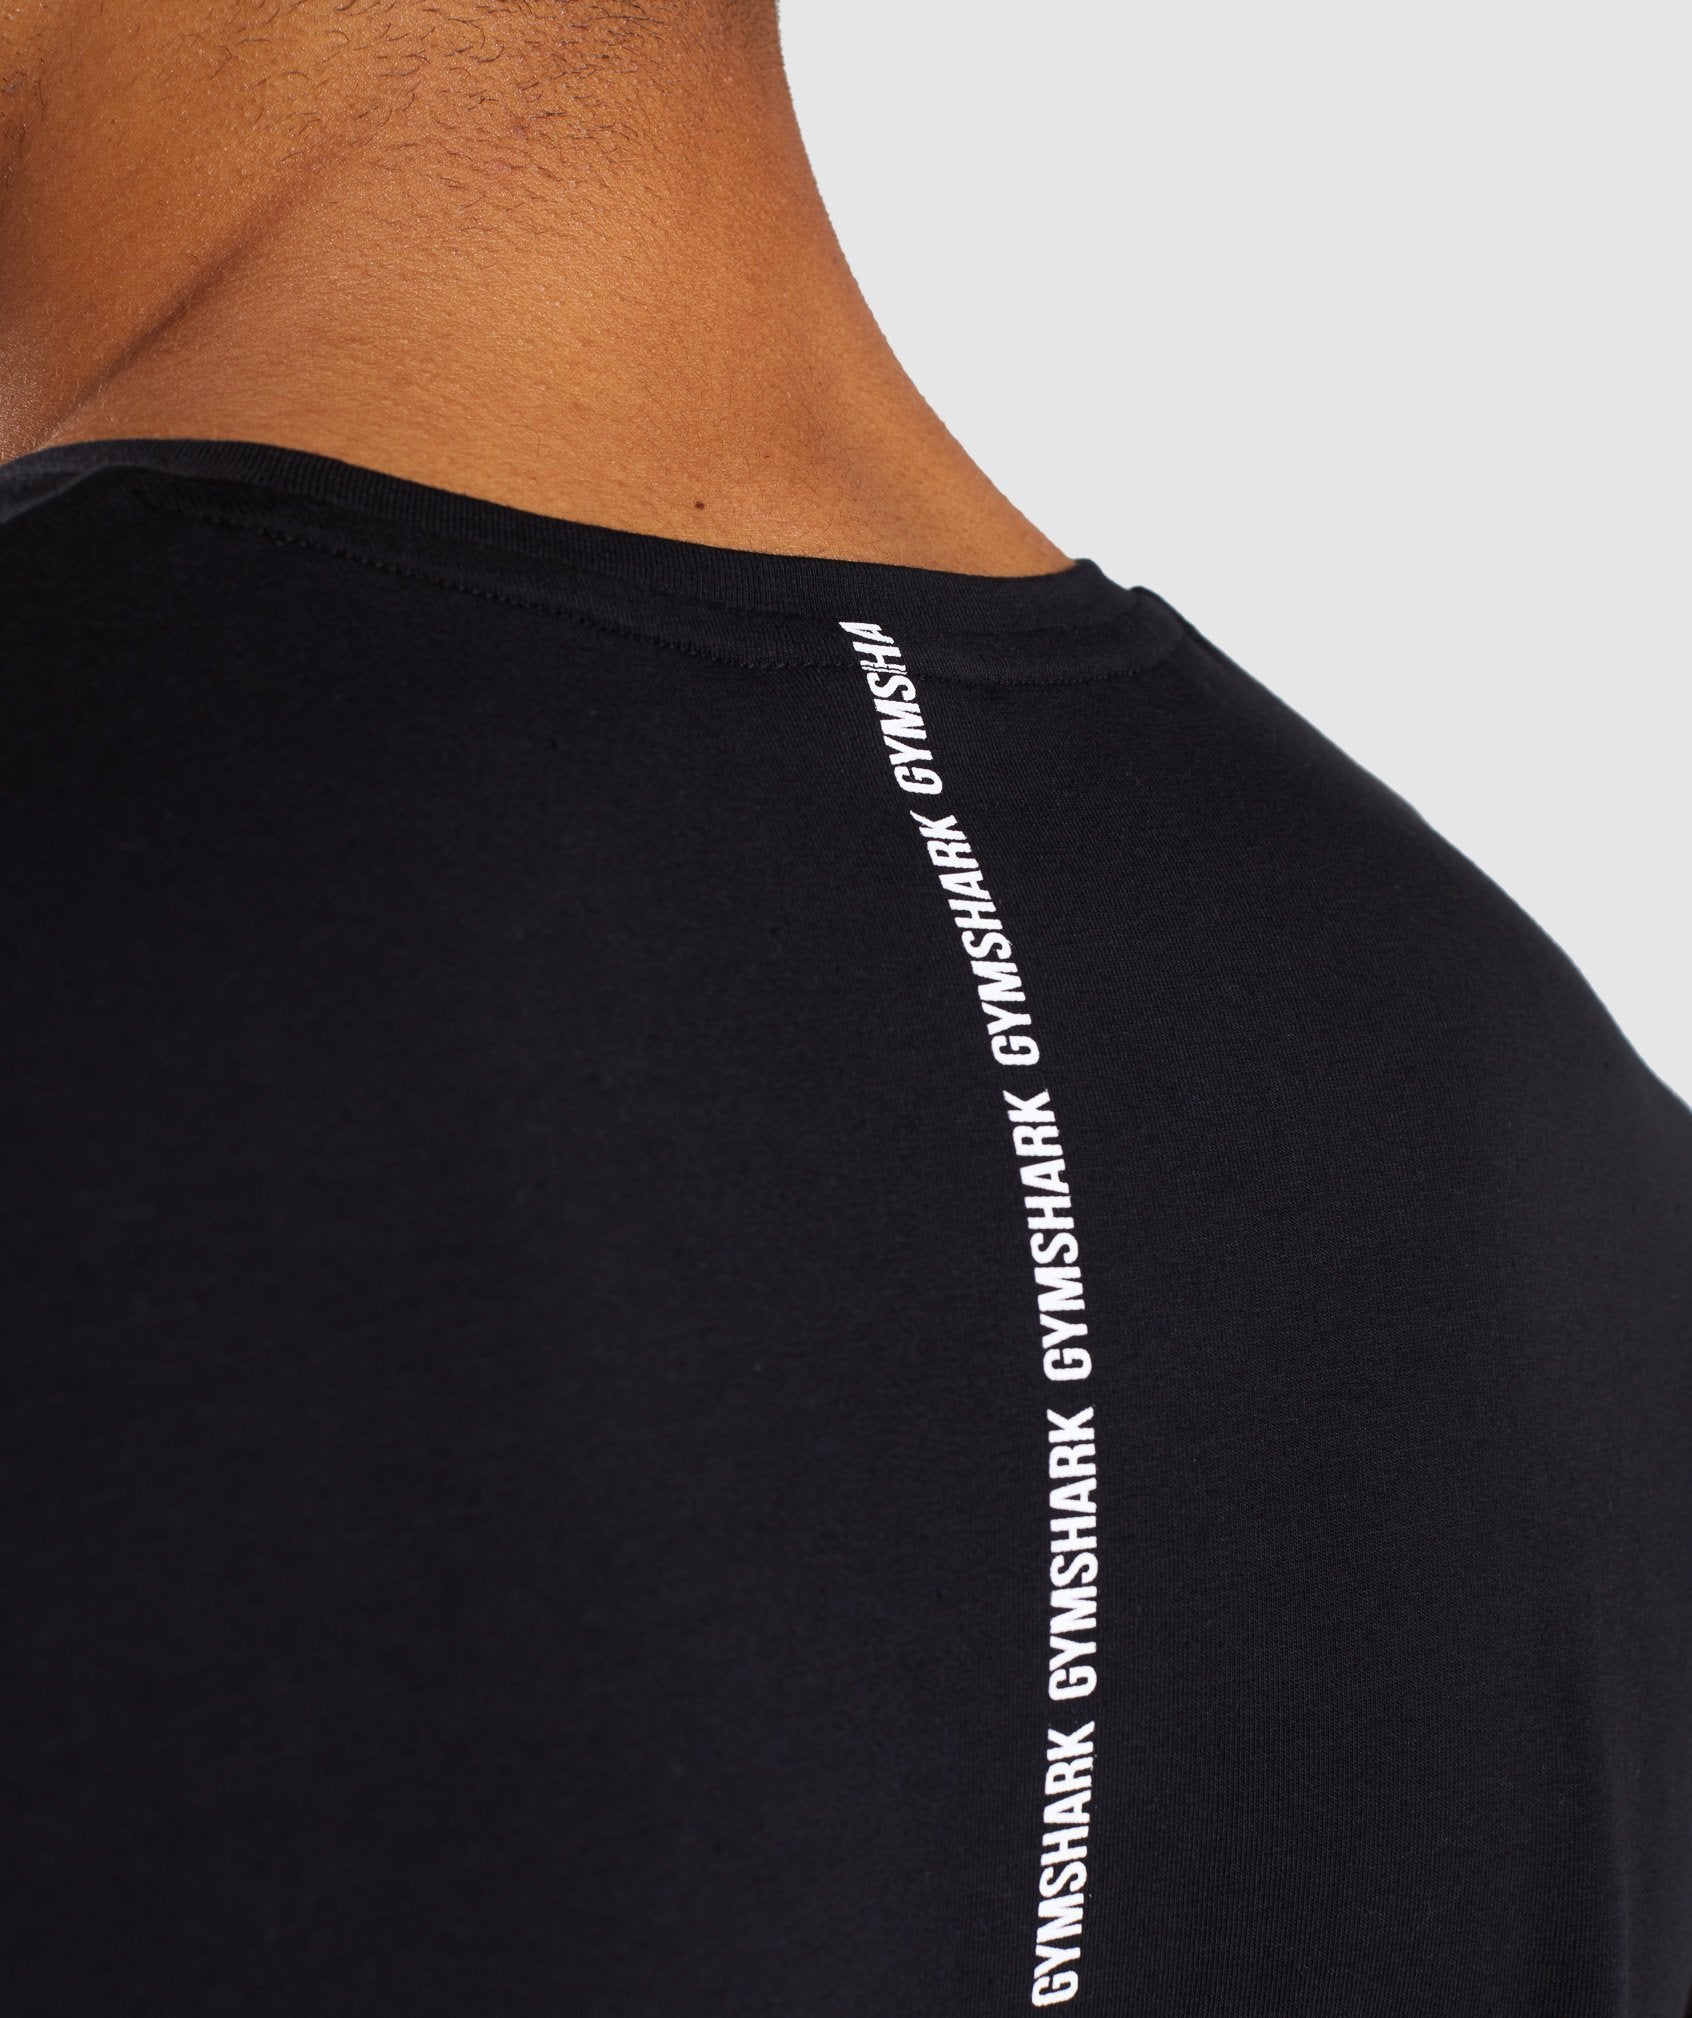 Linear T-Shirt in Black - view 5